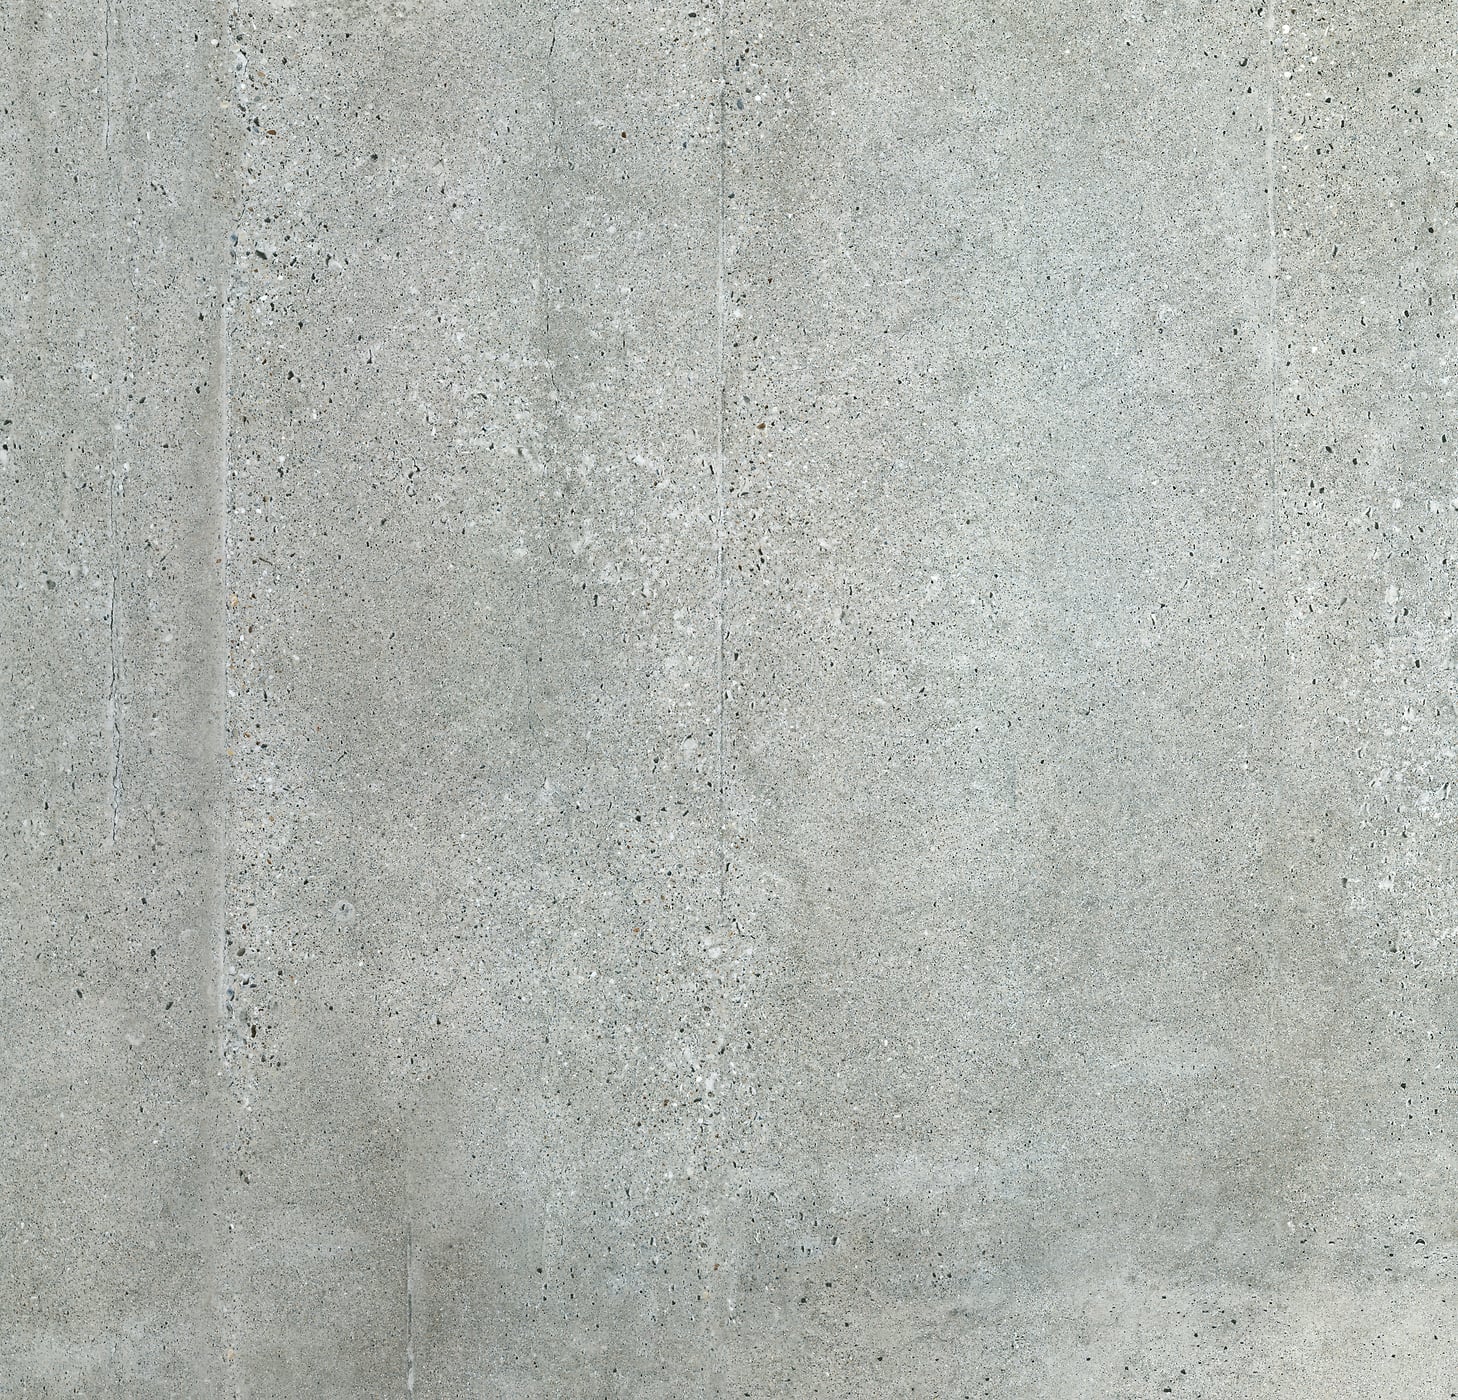 2,836 megapixels! An ultra-high-resolution texture photo file of concrete grey tile; gigapixel photograph created by David Lineton.